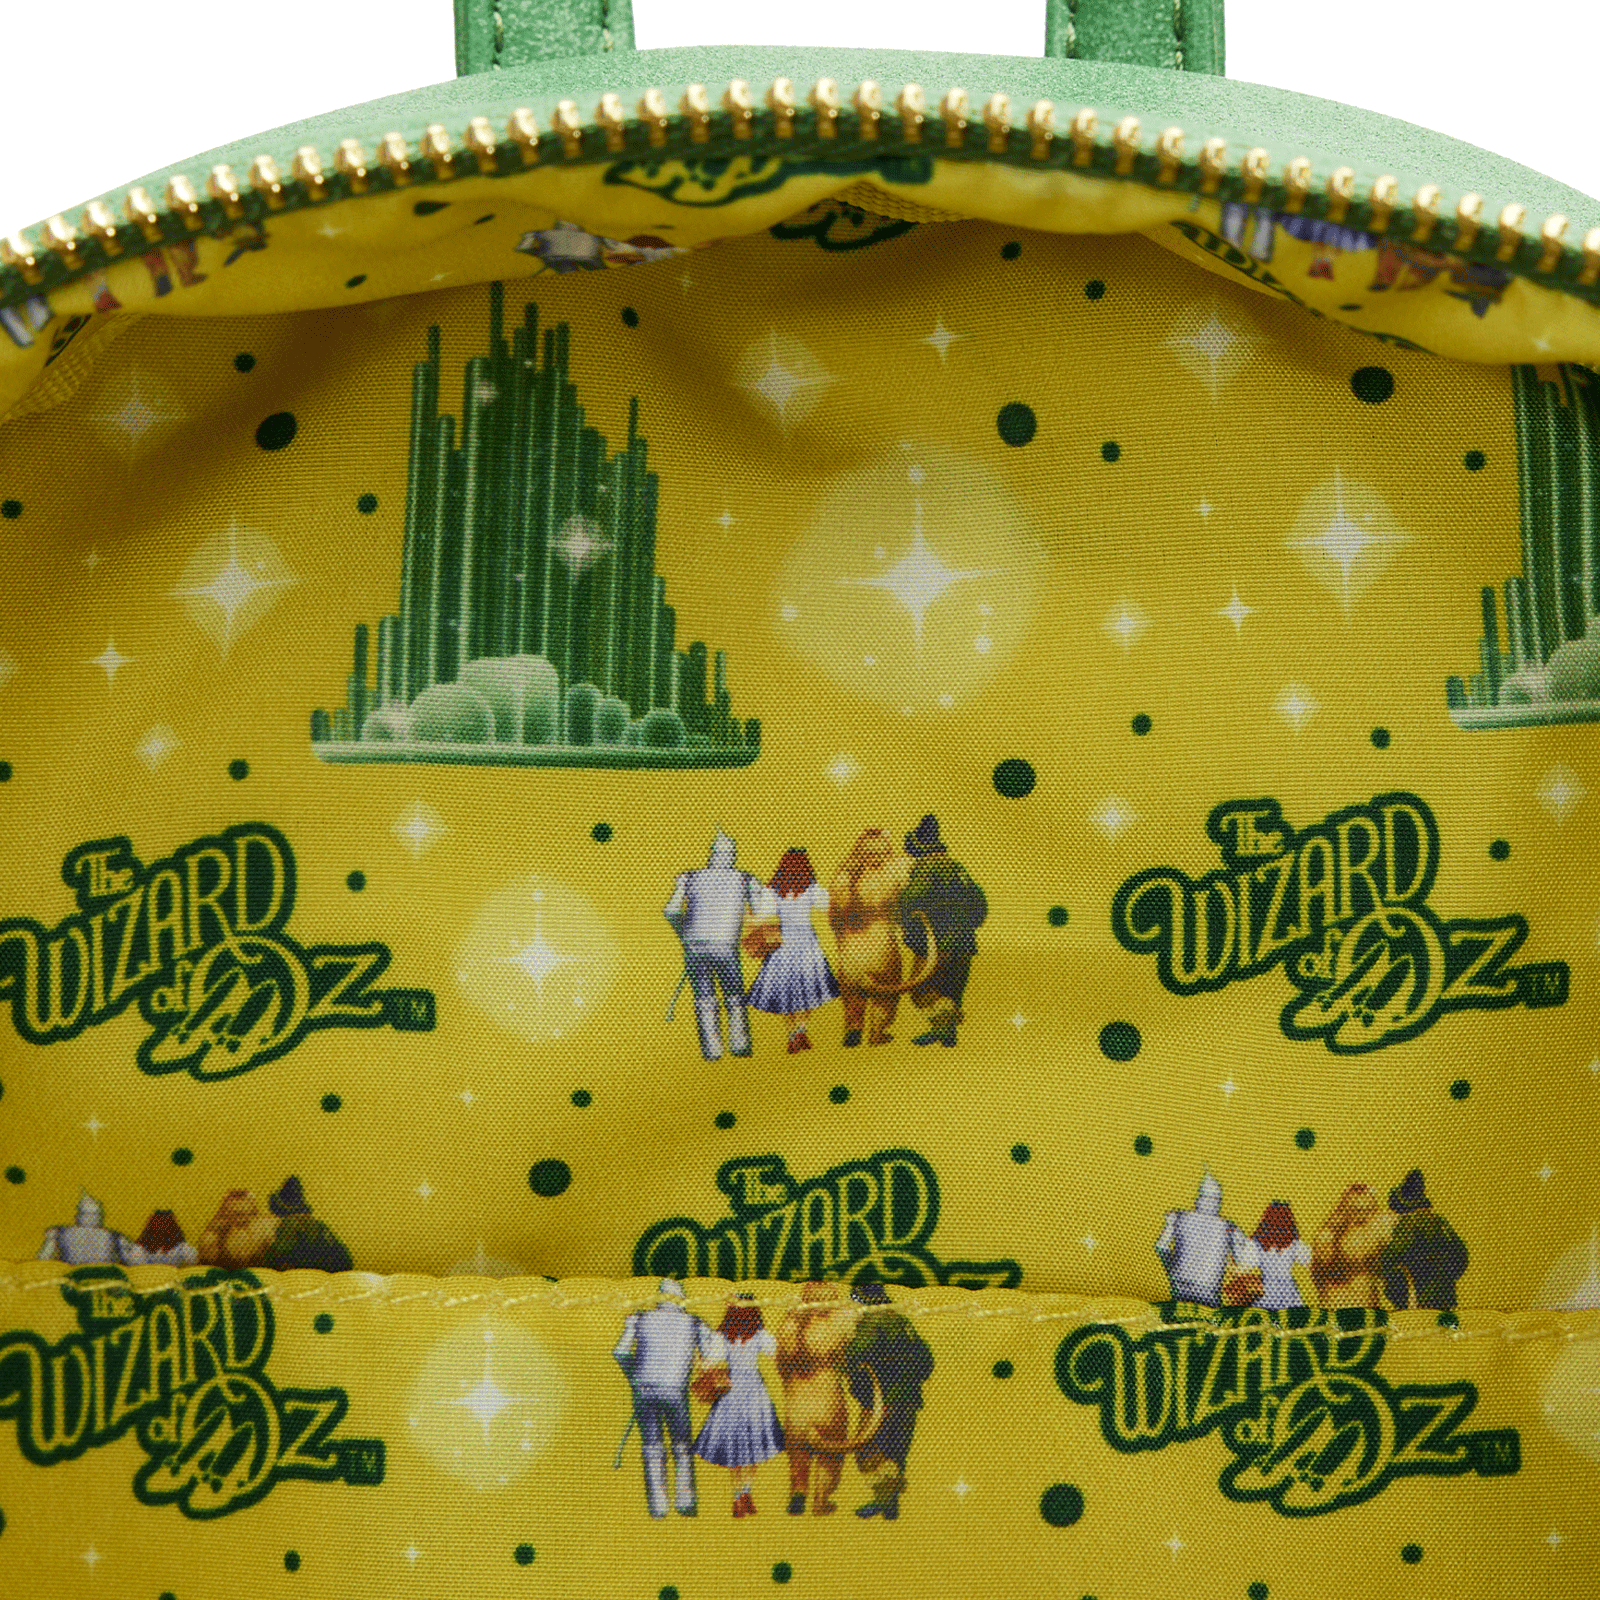 Loungefly x Wizard of Oz Emerald City Mini Backpack